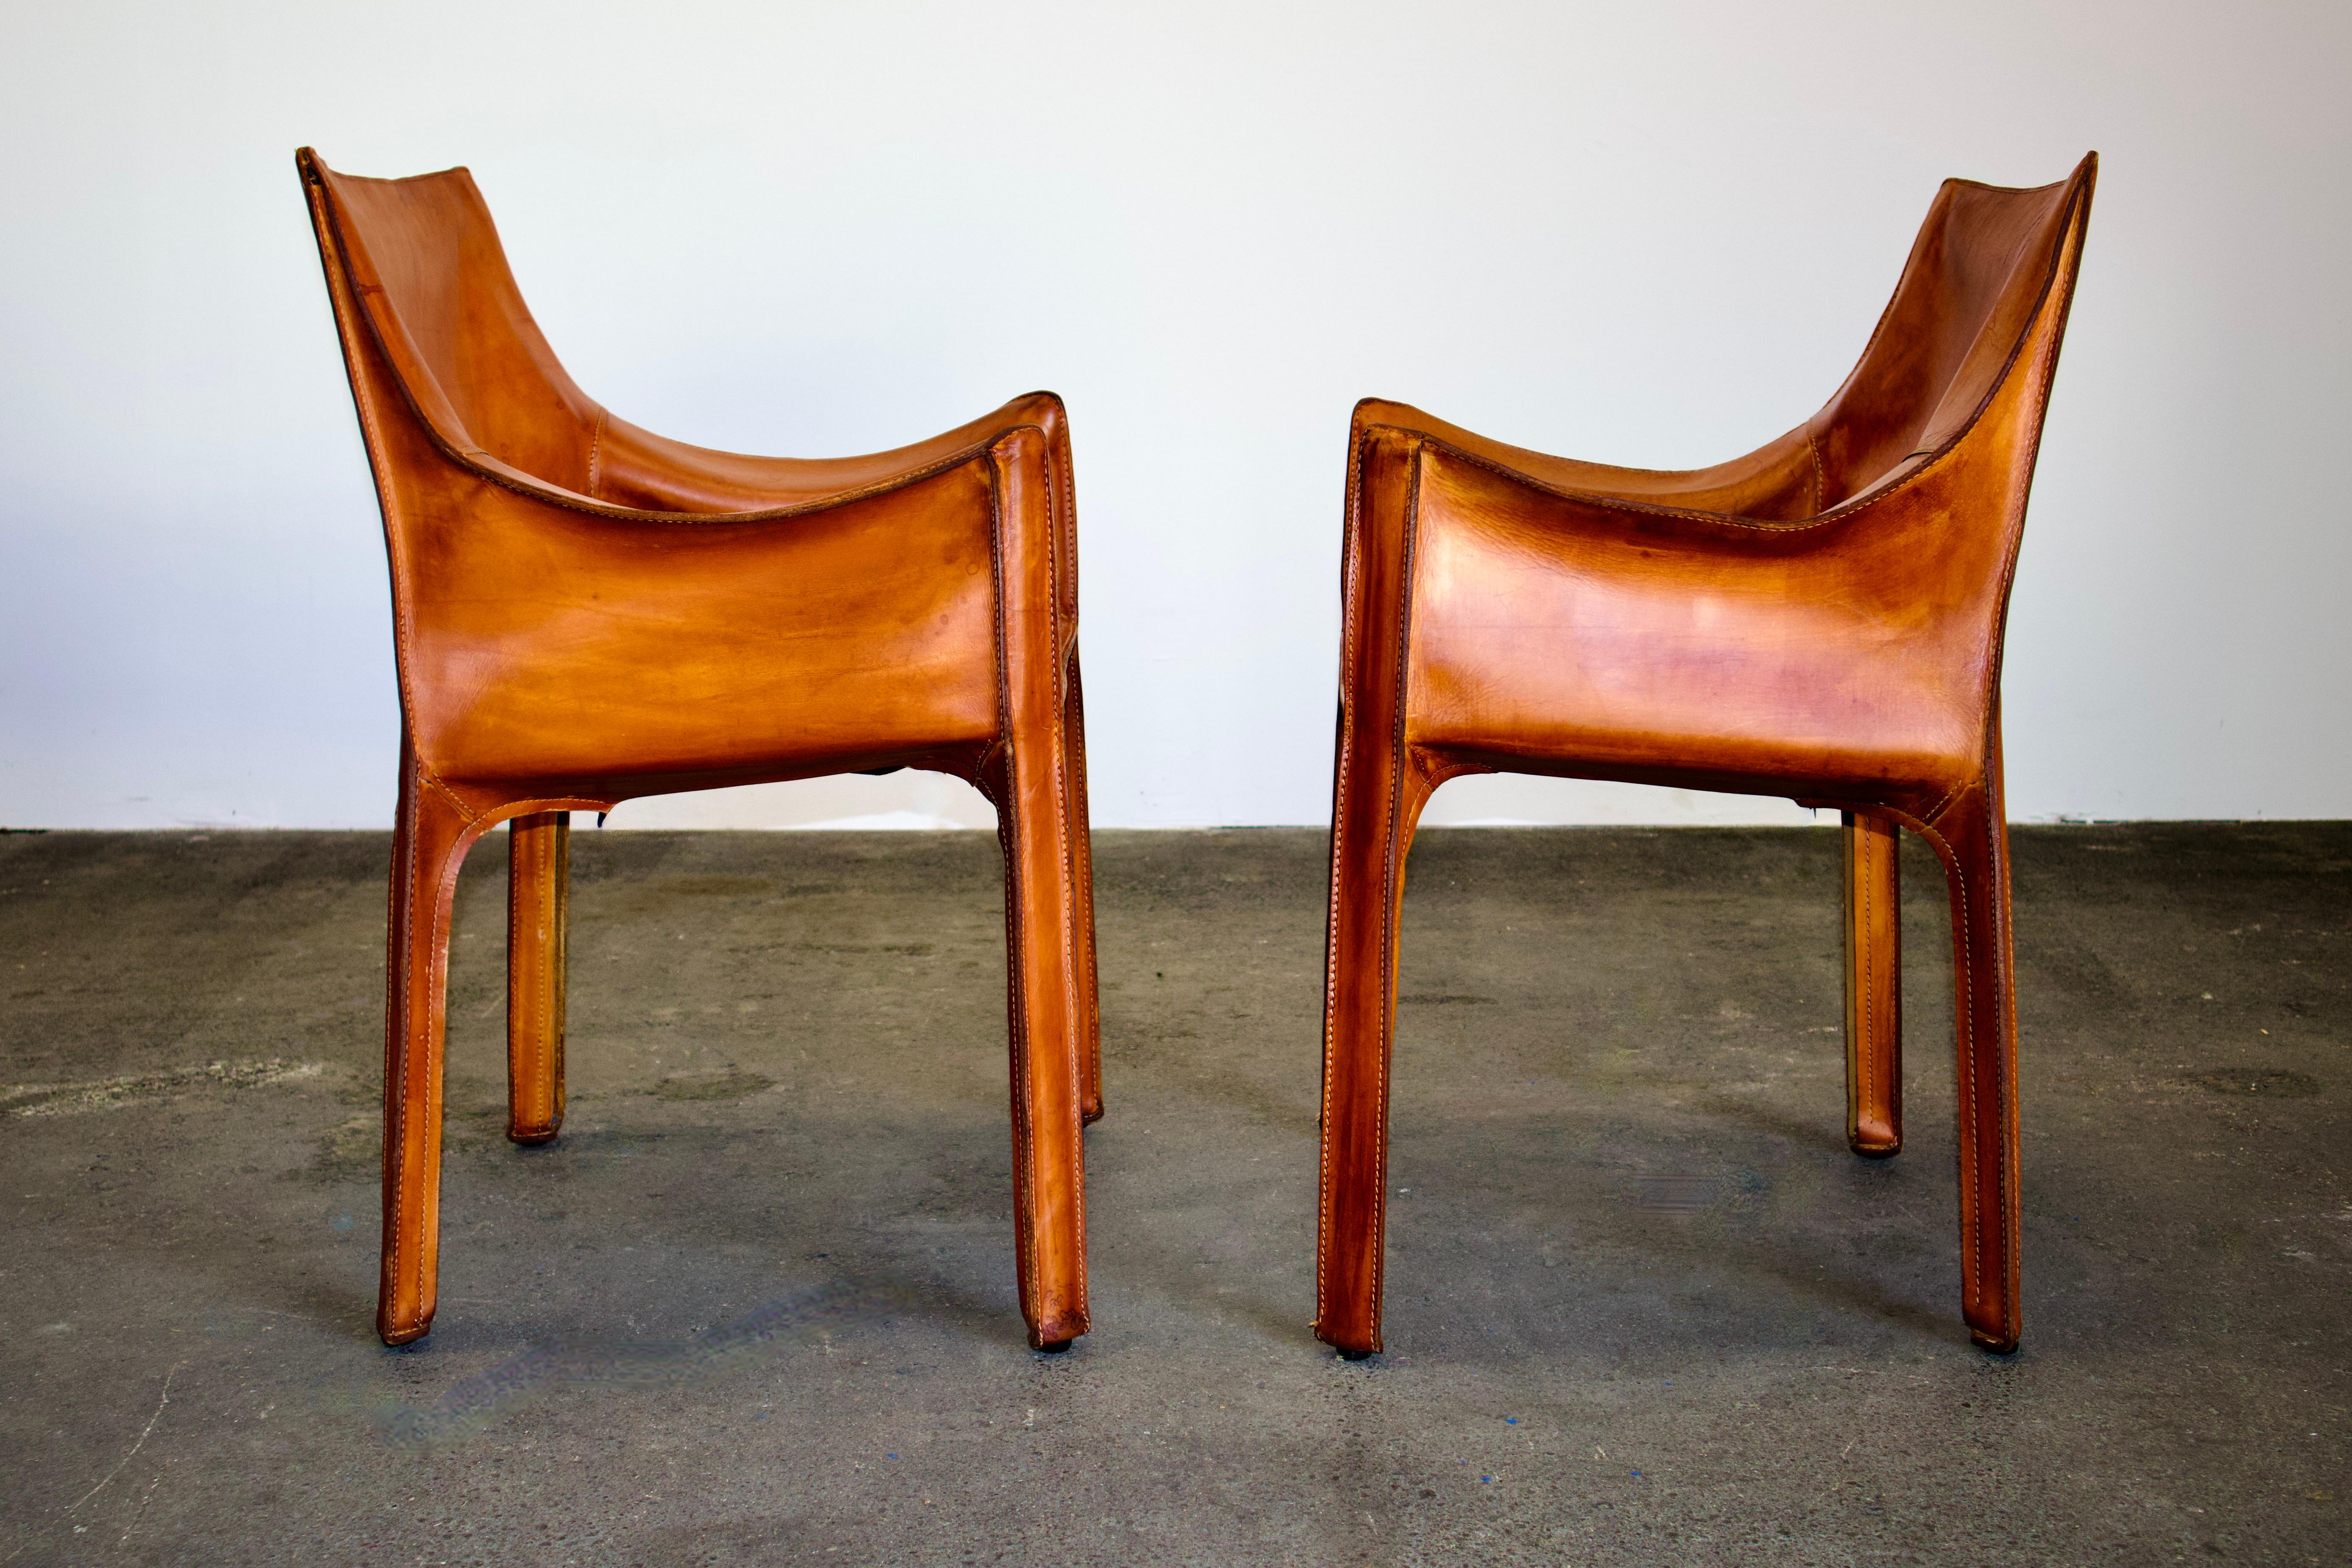 Exquisite pair of original Mario Bellini CAB 413 chairs, a true emblem of timeless design. Manufactured by the renowned Italian design house, Cassina, in the 1970s, these chairs represent a perfect amalgamation of form and function.

Key